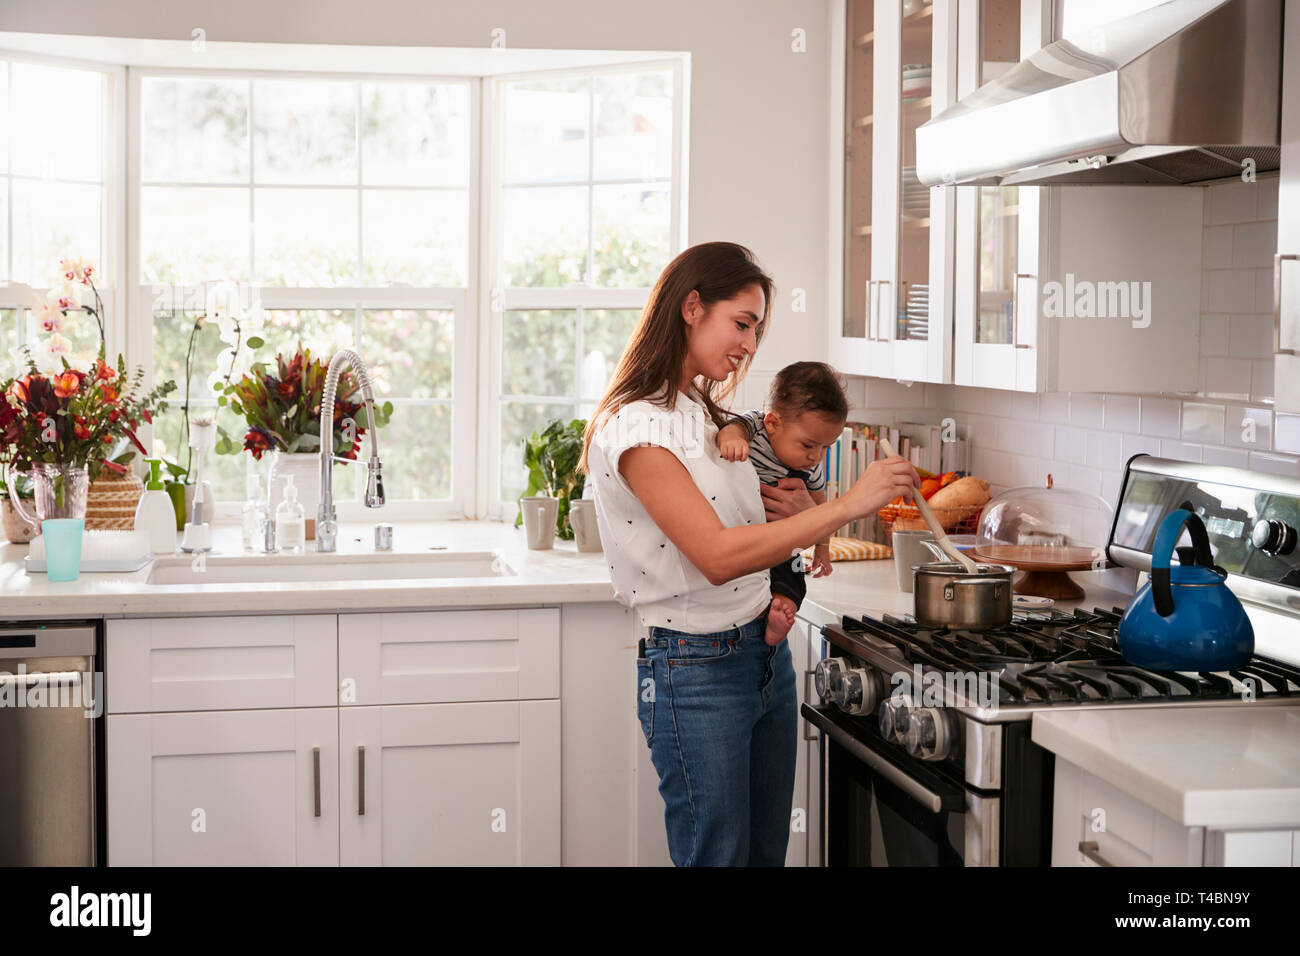 Multitasking mum holding her young baby while she makes food at the hob in her kitchen, side view Stock Photo